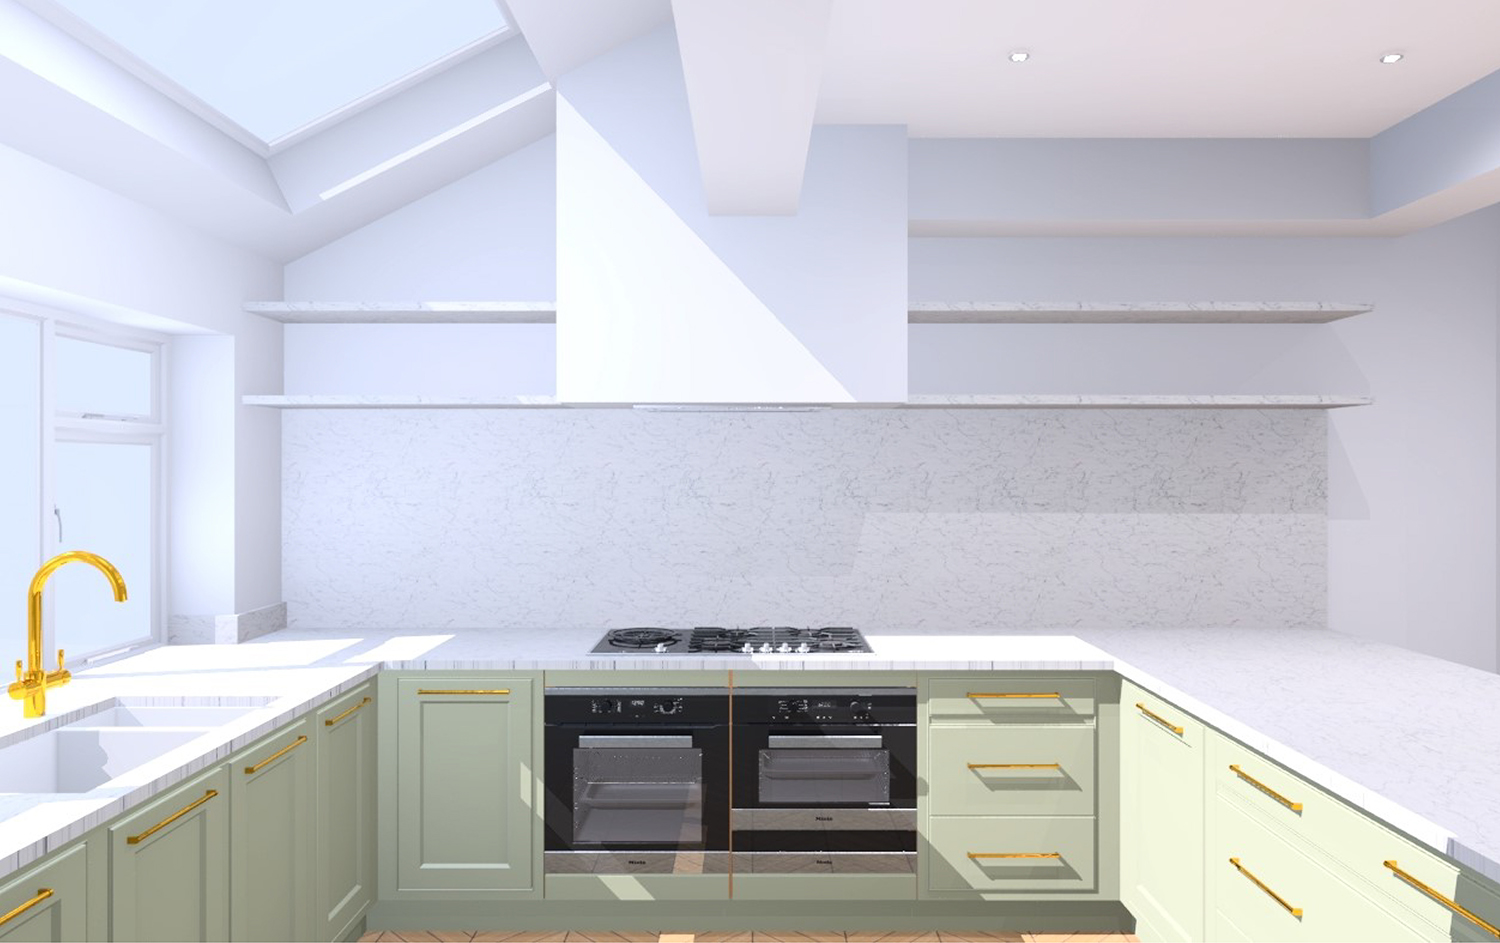 Kitchen design CAD drawing cooker hood and shelving